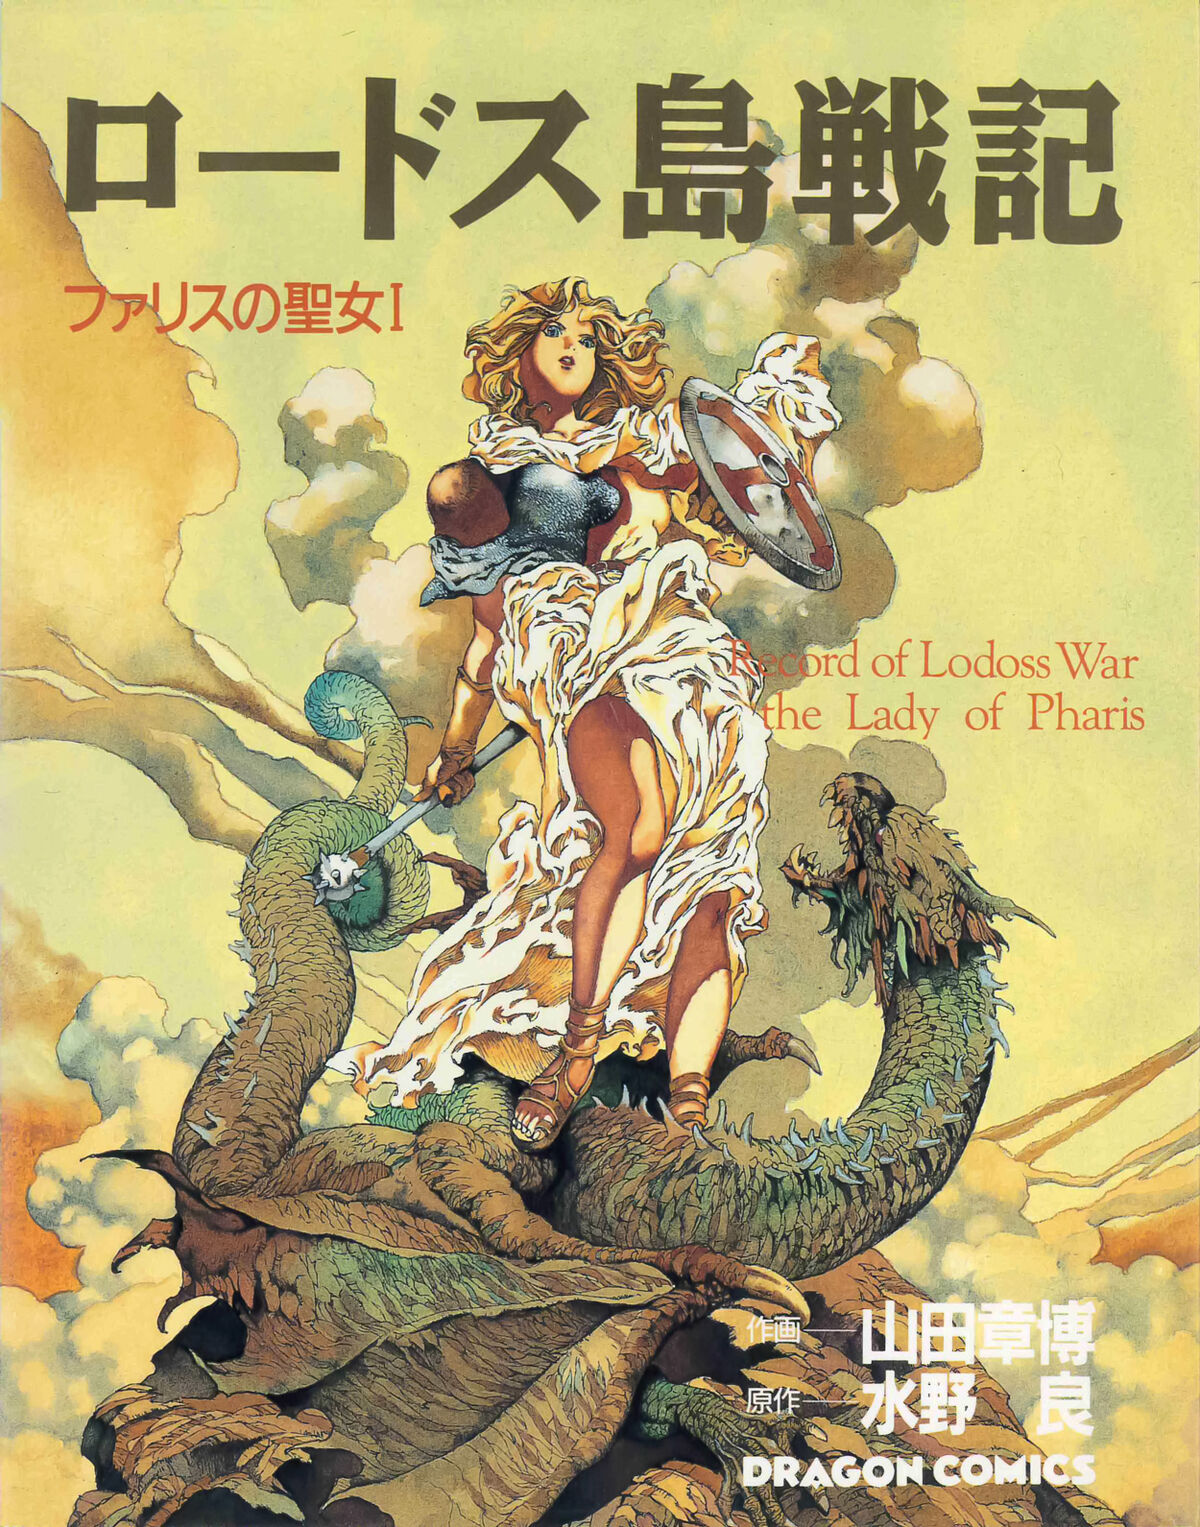 Record of Lodoss War: The Lady of Pharis (manga) | Record of